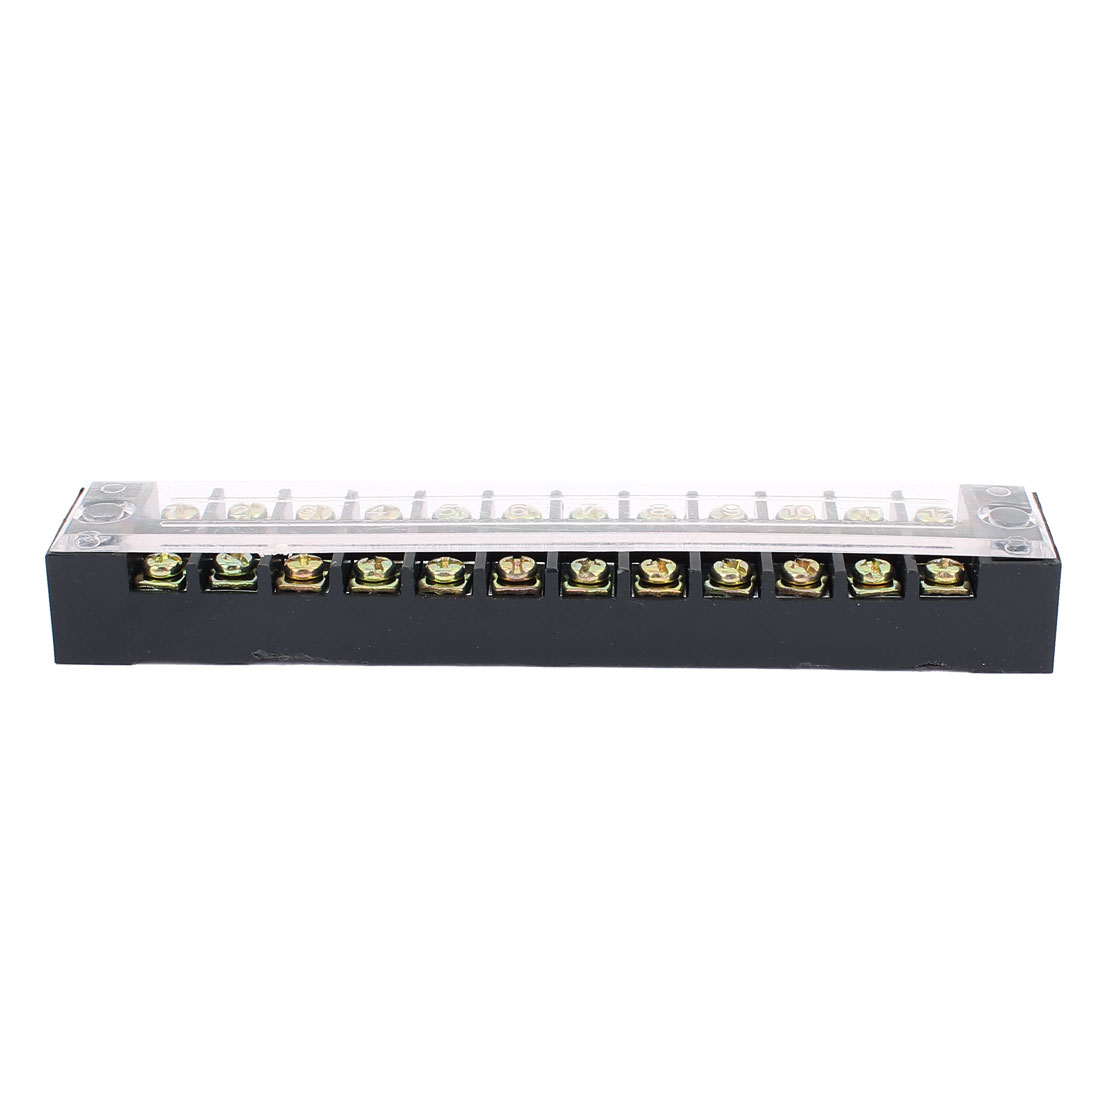 10 Pcs 600V 15A 12P Screw Electrical Barrier Terminal Block Cable Connector Bar - image 4 of 5